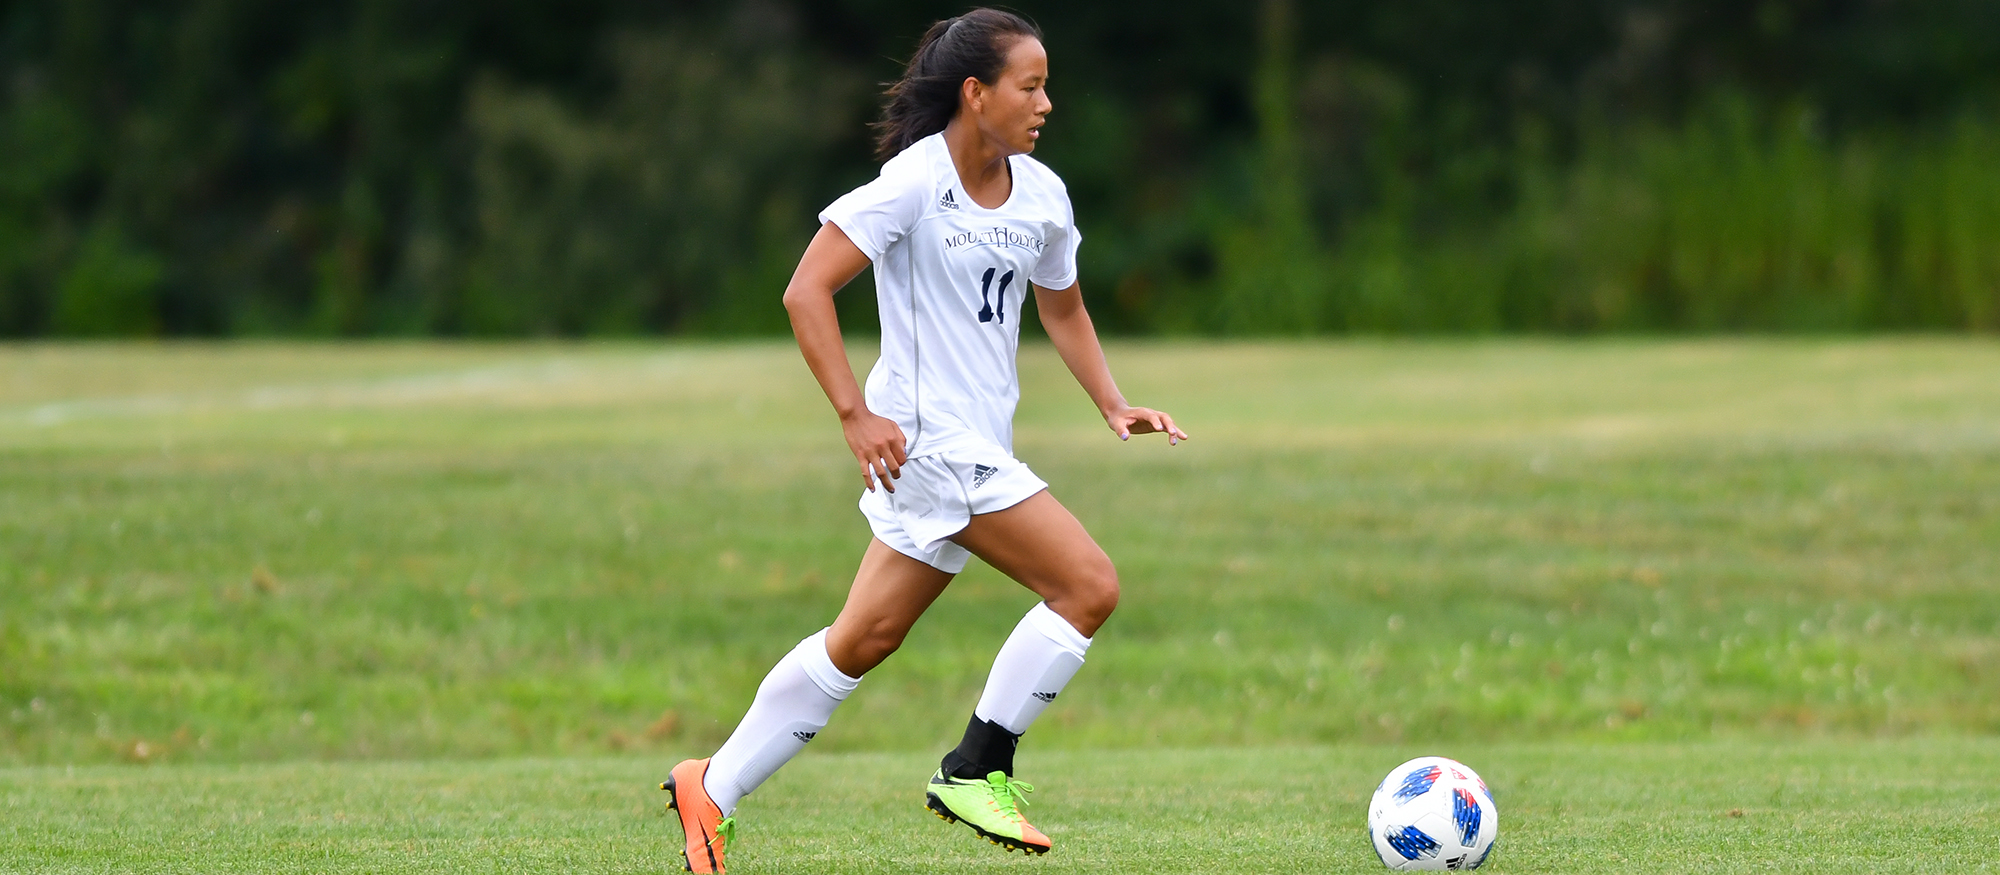 Soccer Falls to Nationally-Ranked Amherst in Non-Conference Play